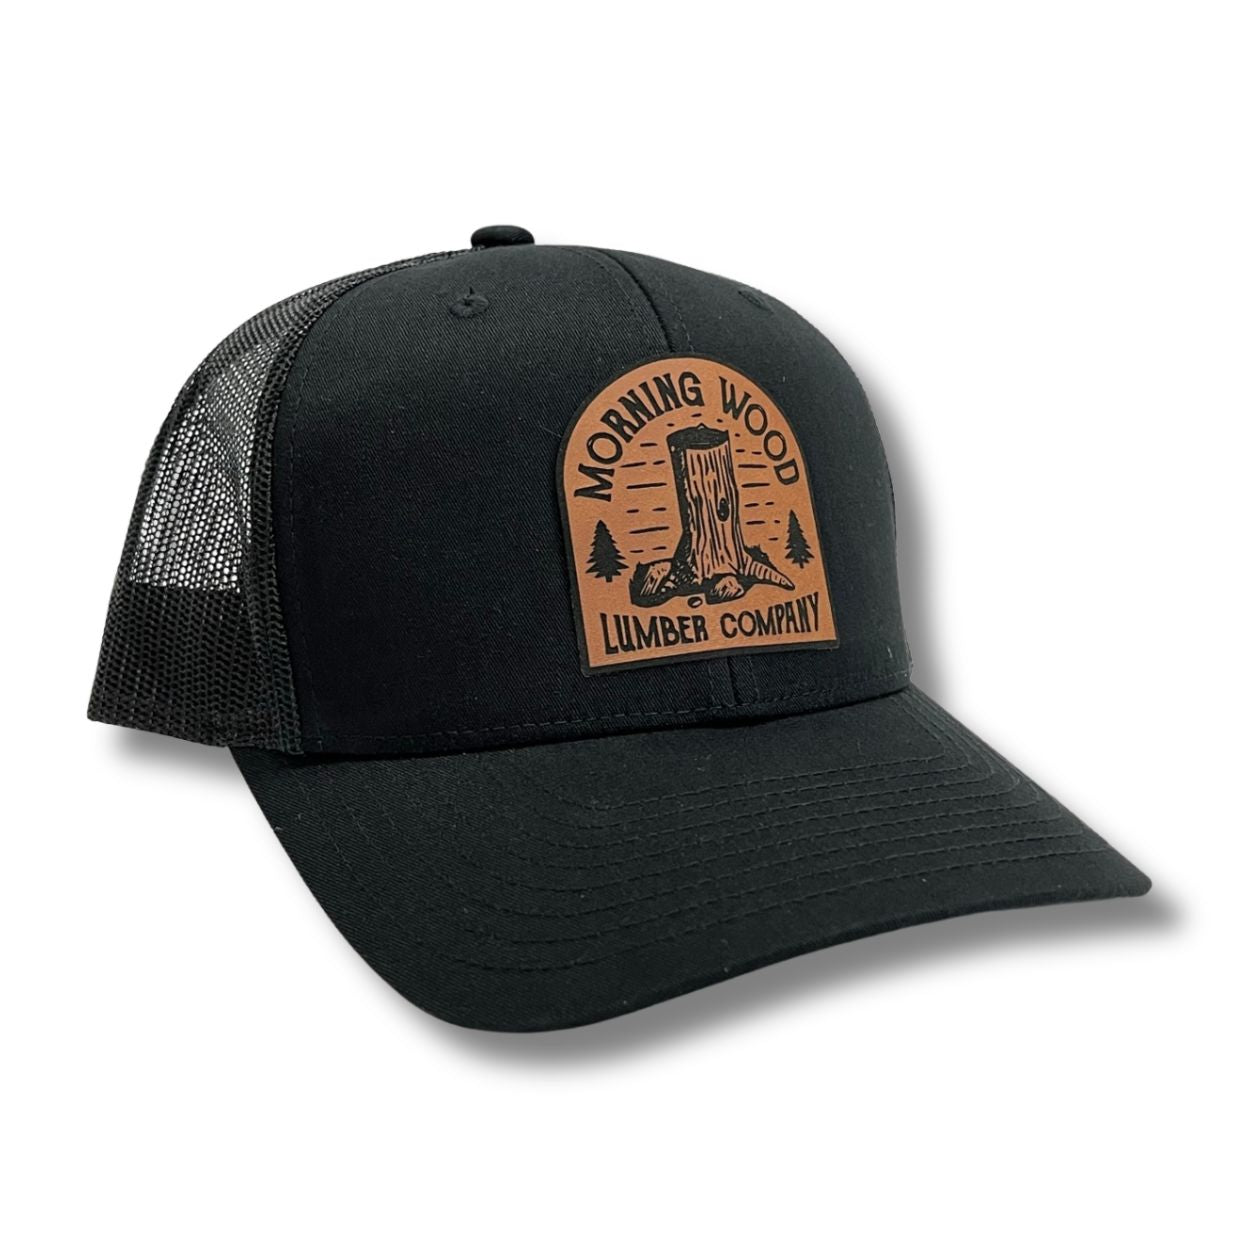 Morning Wood Lumber Company Hat With Patch Trendy Hat Hat Trend